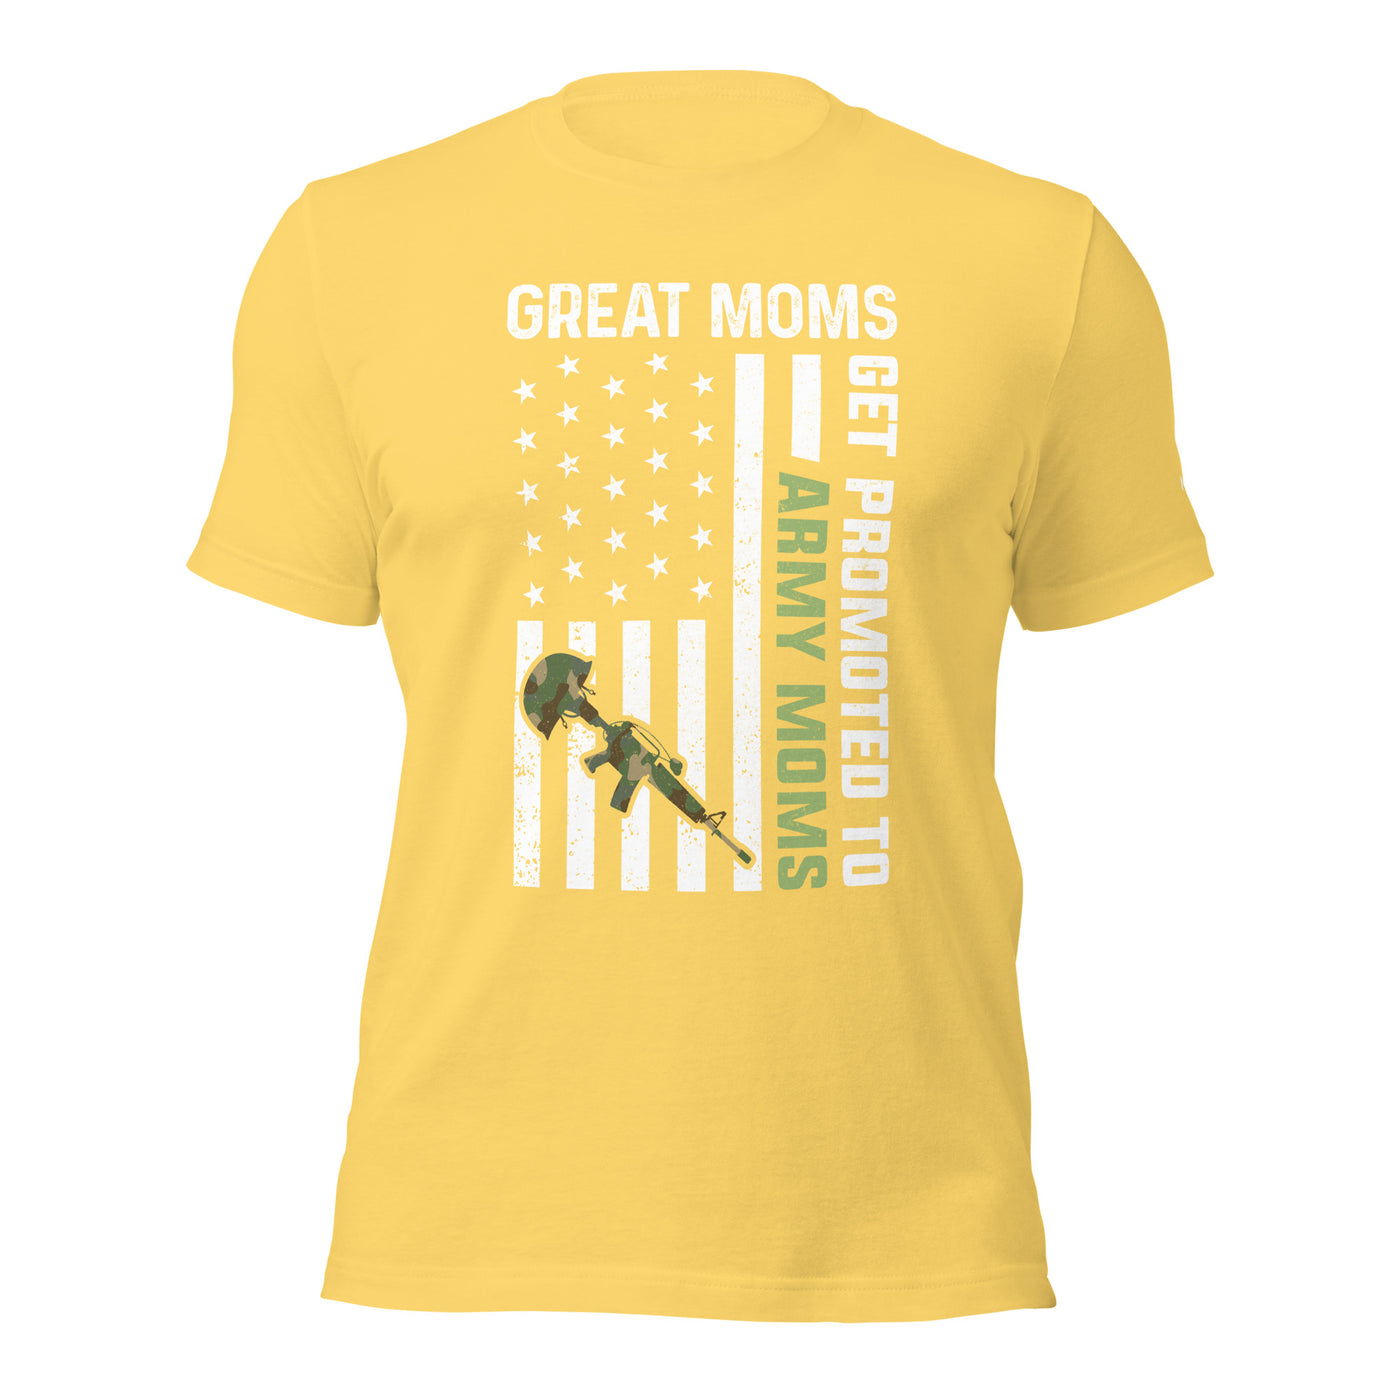 Army Moms, Great Moms promoted - Unisex t-shirt